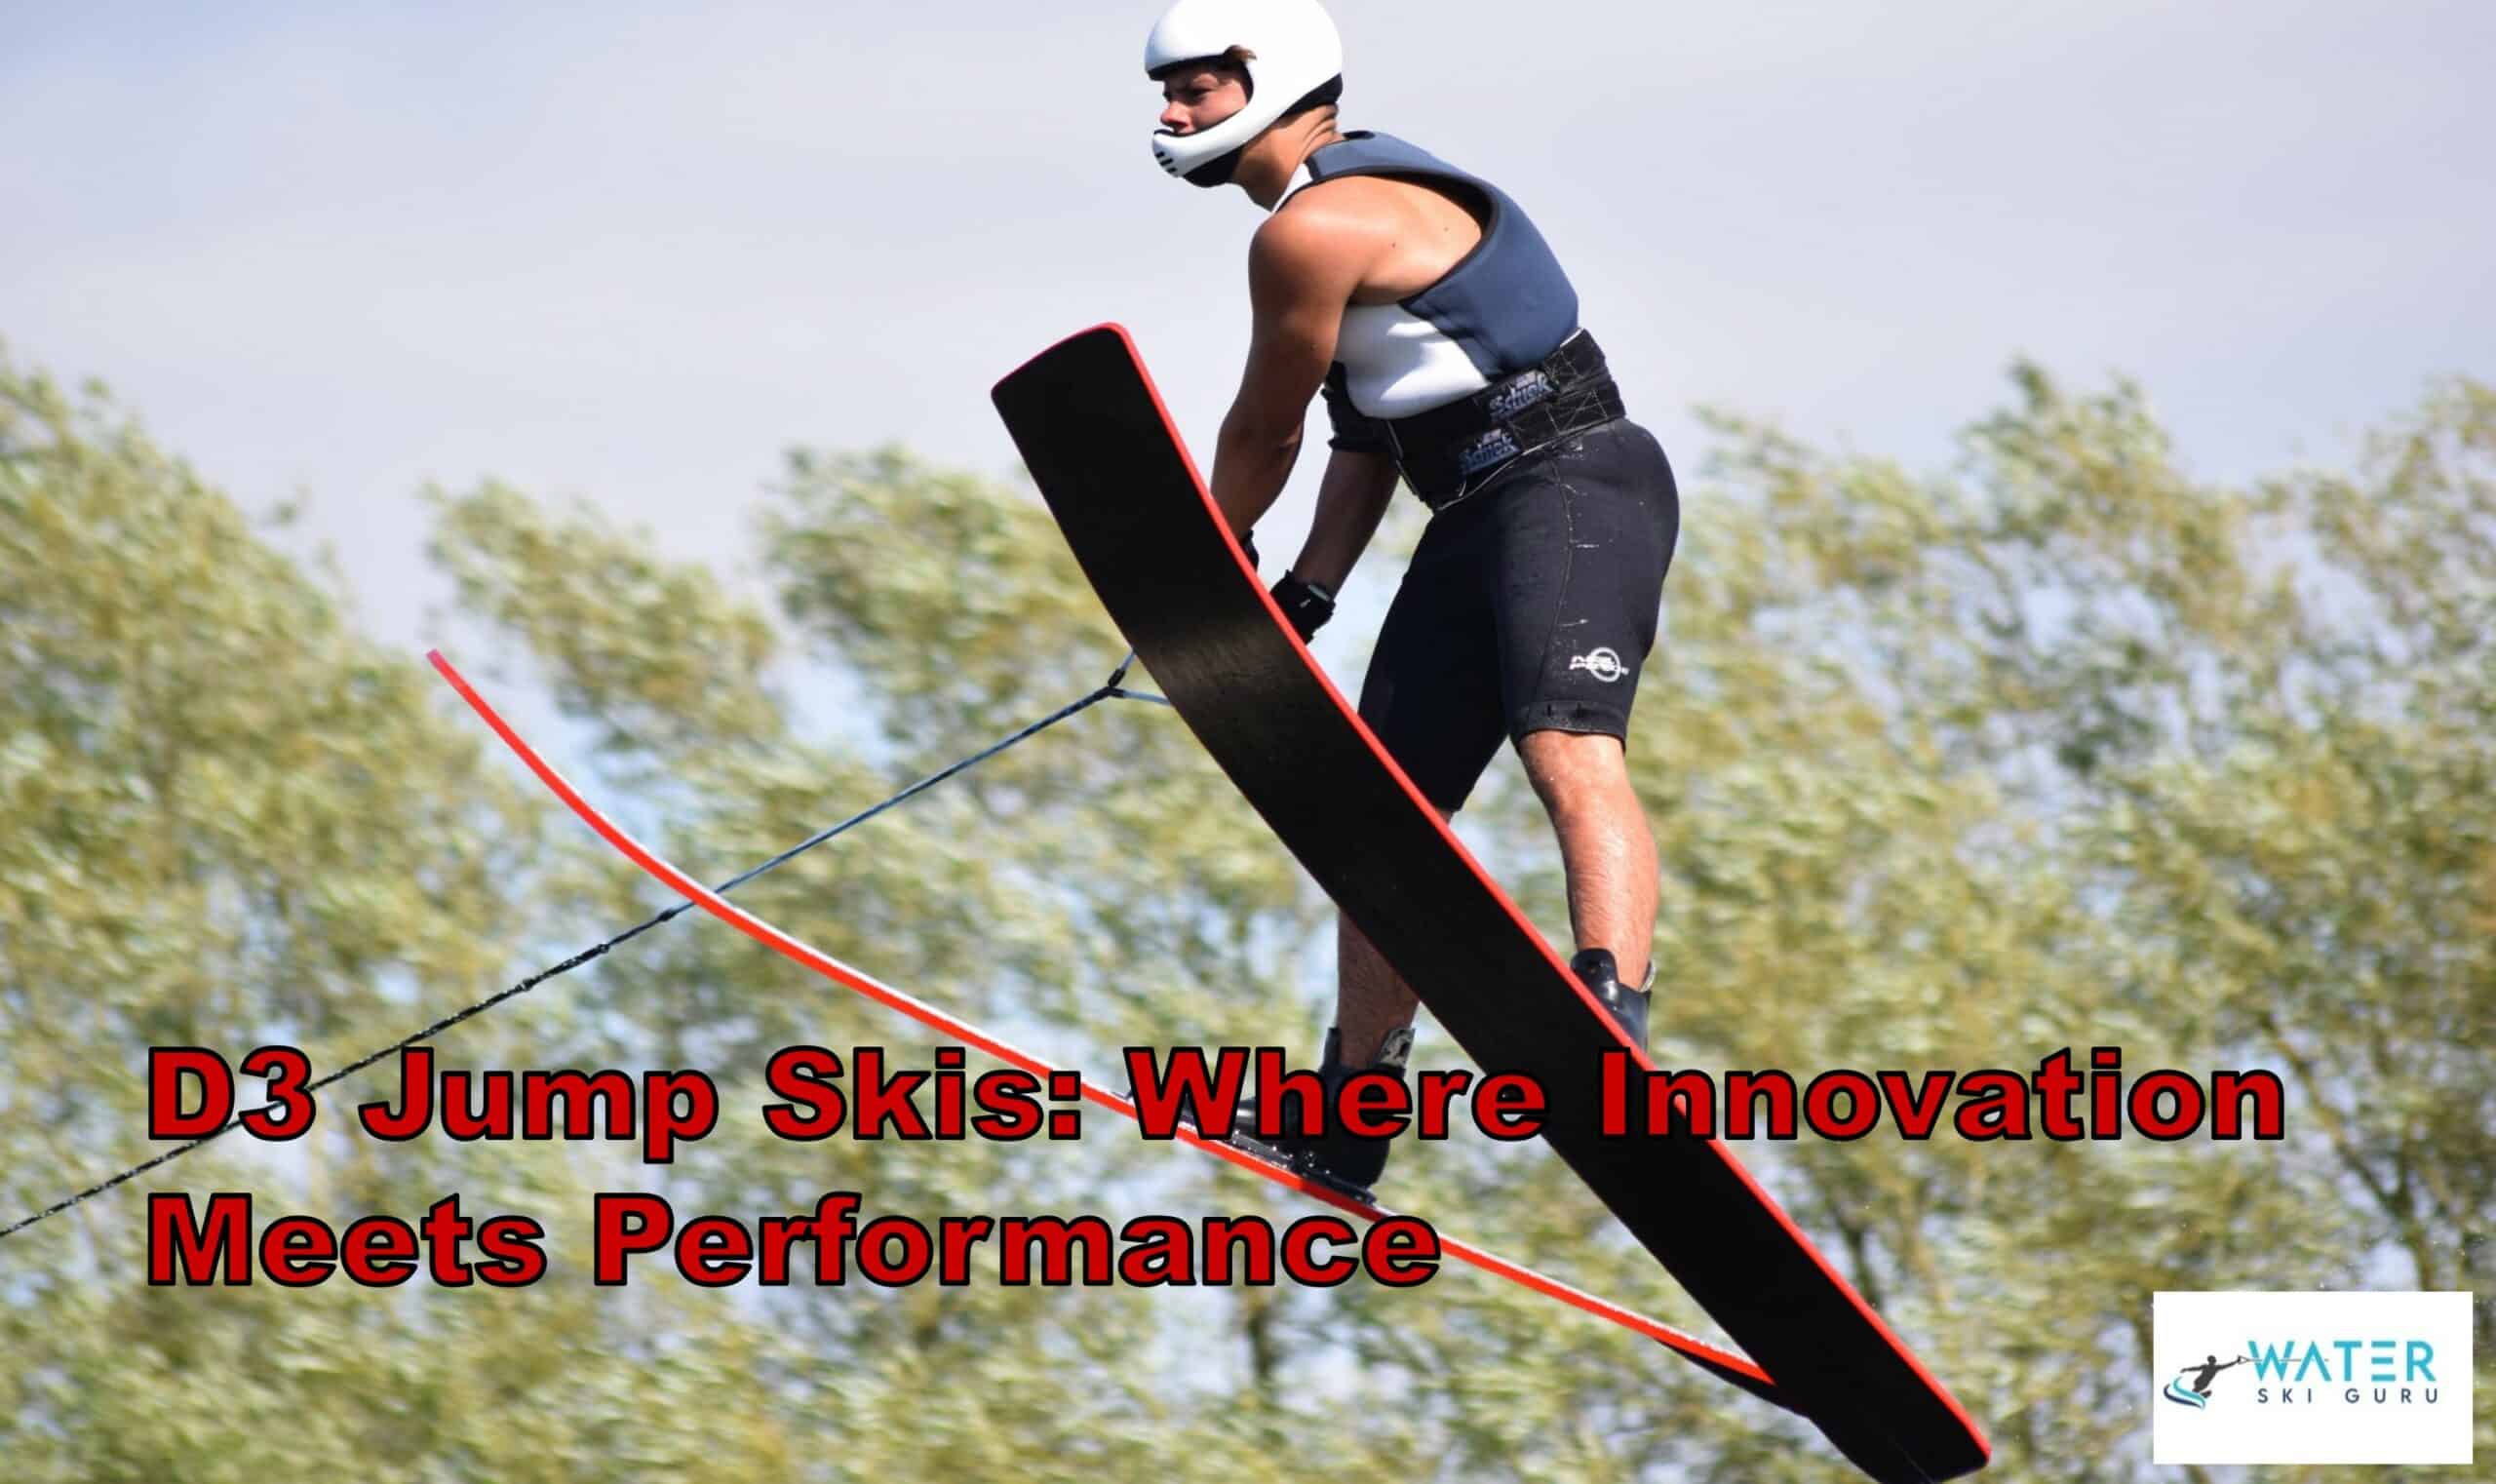 D3 Jump Skis Where Innovation Meets Performance